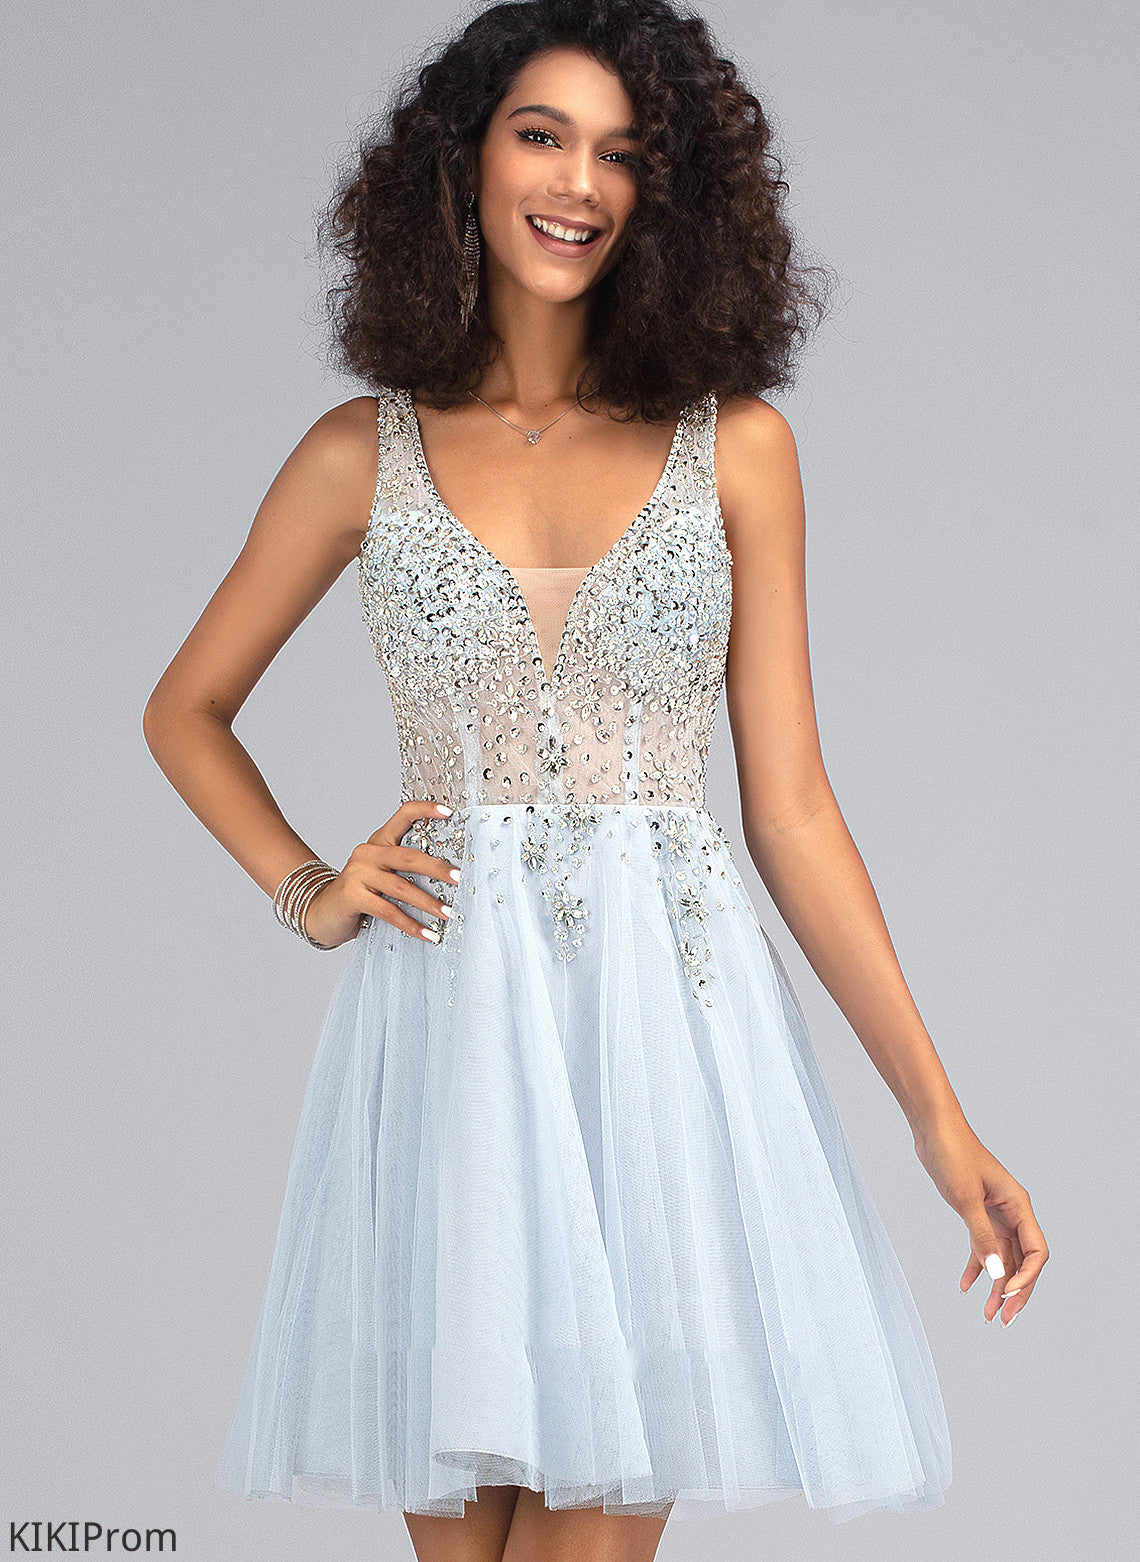 Beading With Short/Mini Amirah Dress A-Line Sequins V-neck Homecoming Dresses Homecoming Tulle